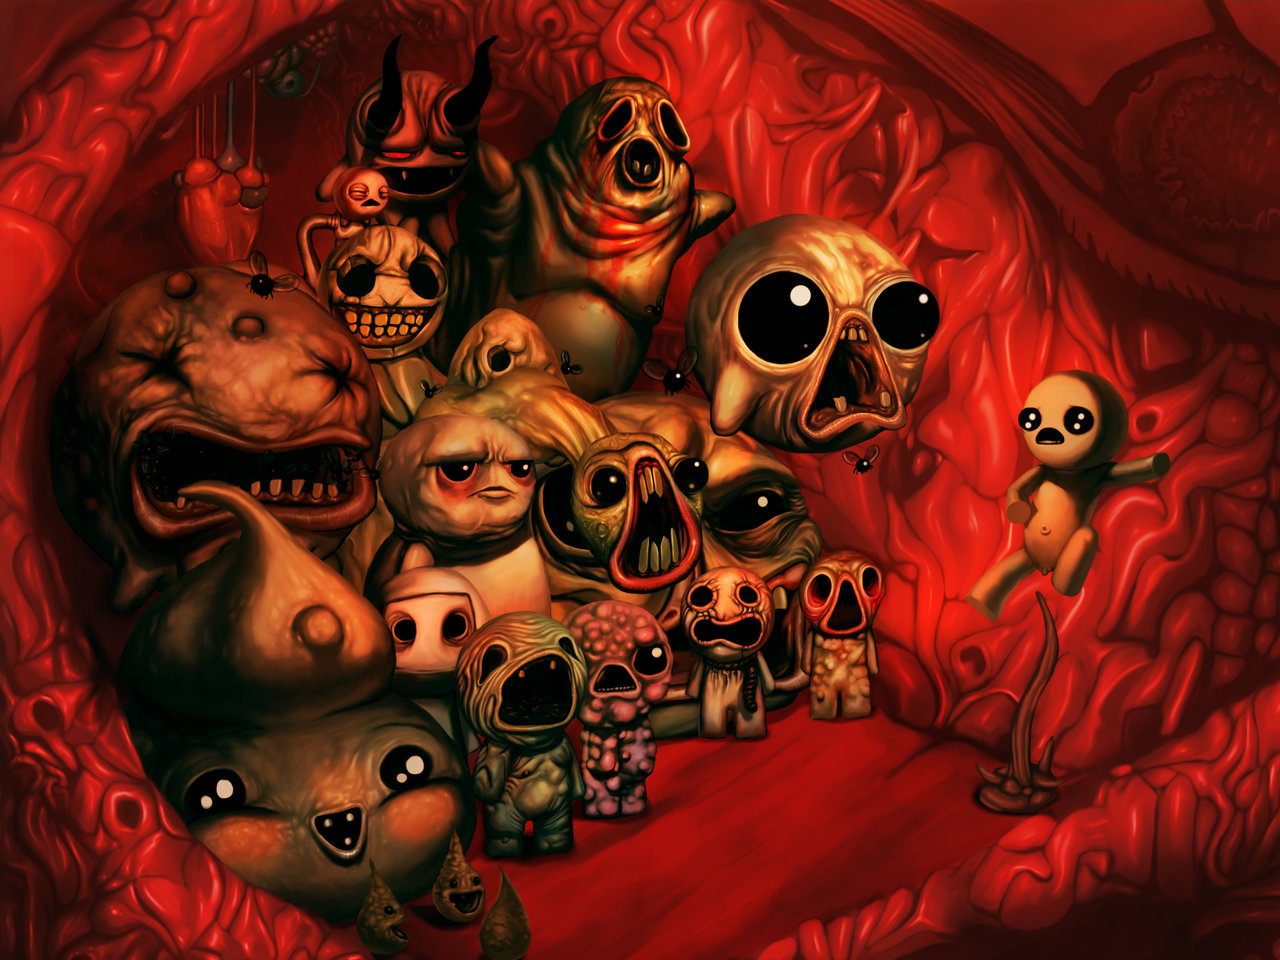 download the binding of isaac newgrounds for free